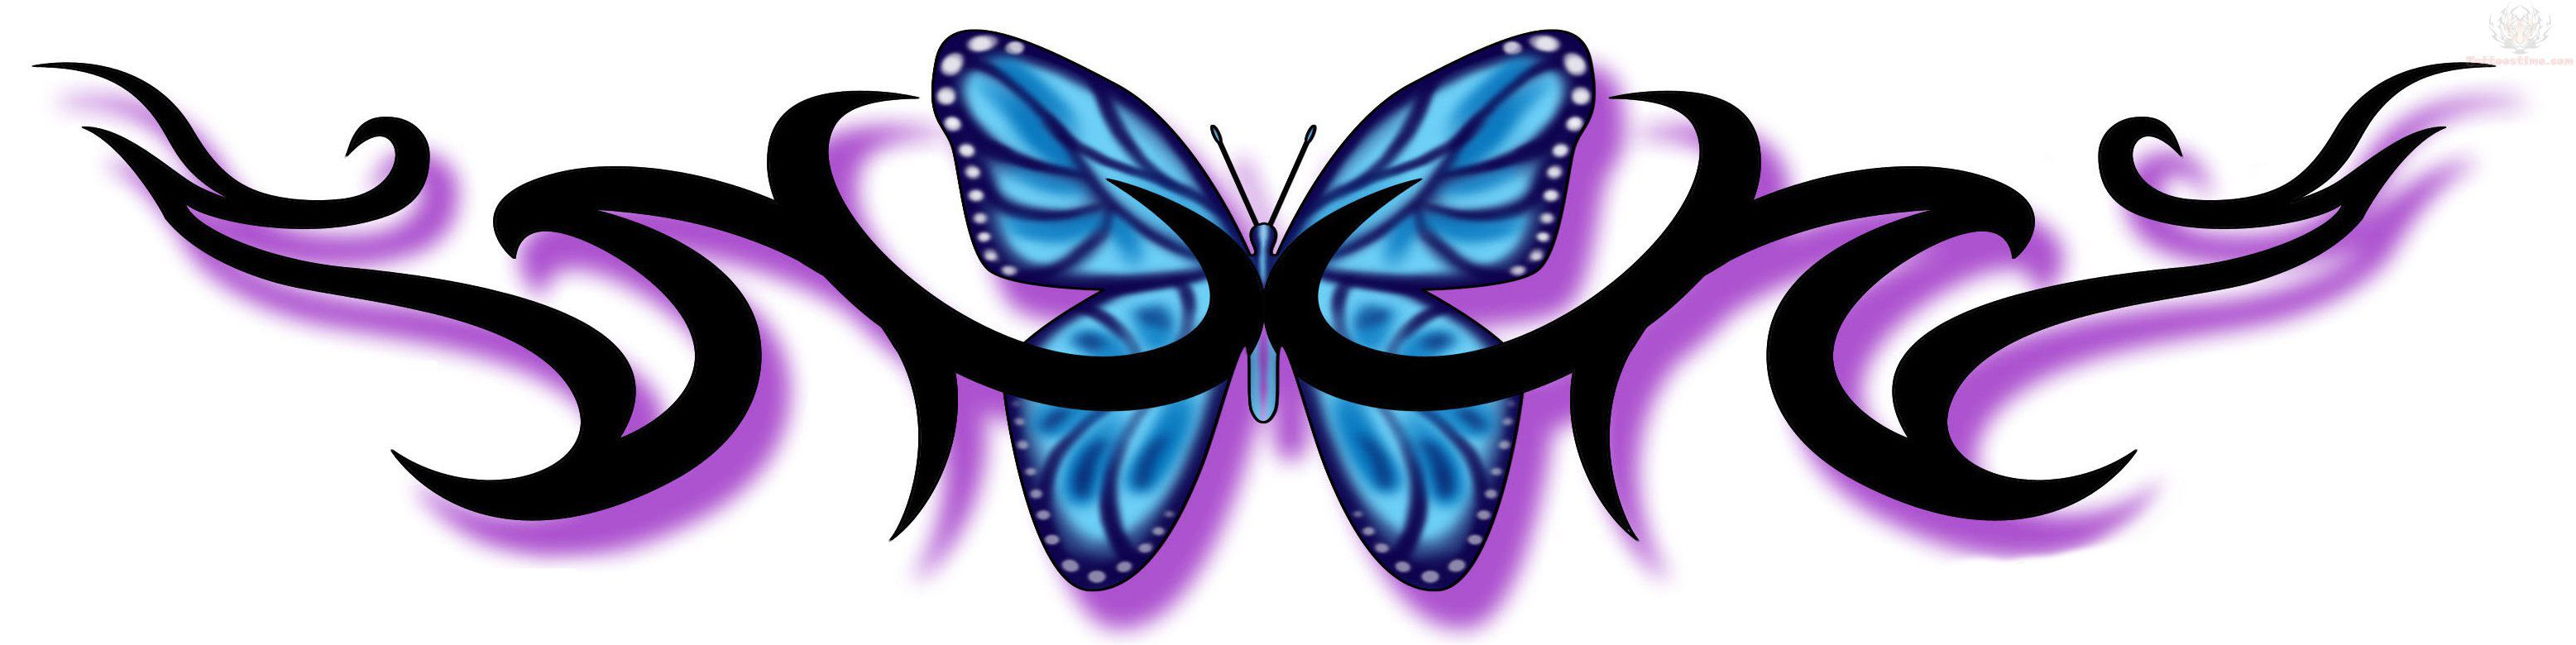 Daintytriballowerbacktattos Blue Butterfly And Tribal with regard to measurements 3114 X 780